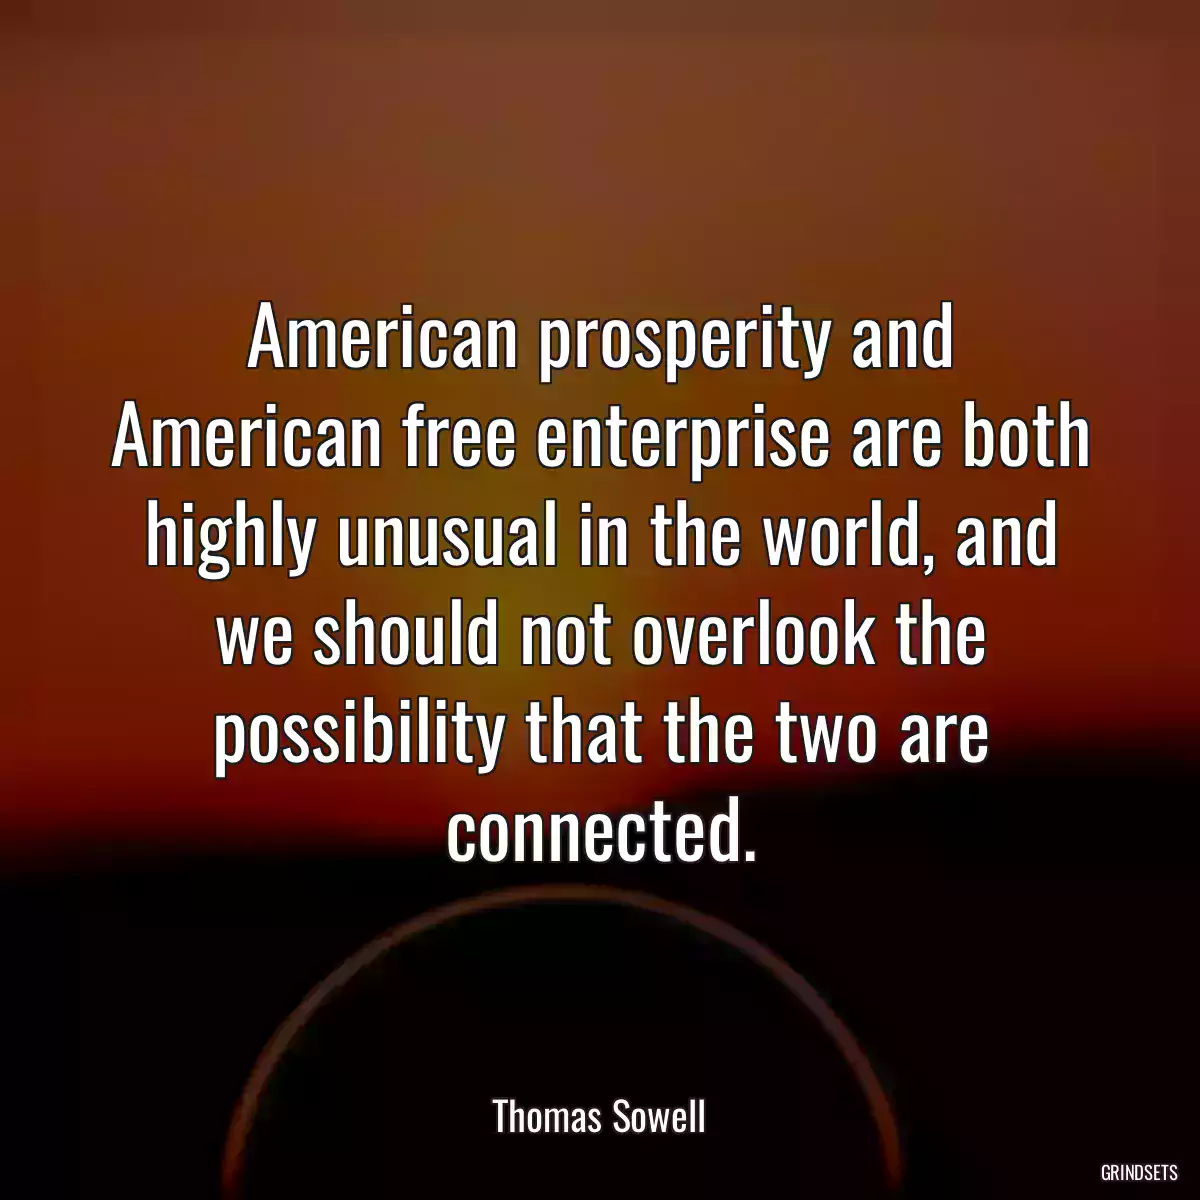 American prosperity and American free enterprise are both highly unusual in the world, and we should not overlook the possibility that the two are connected.